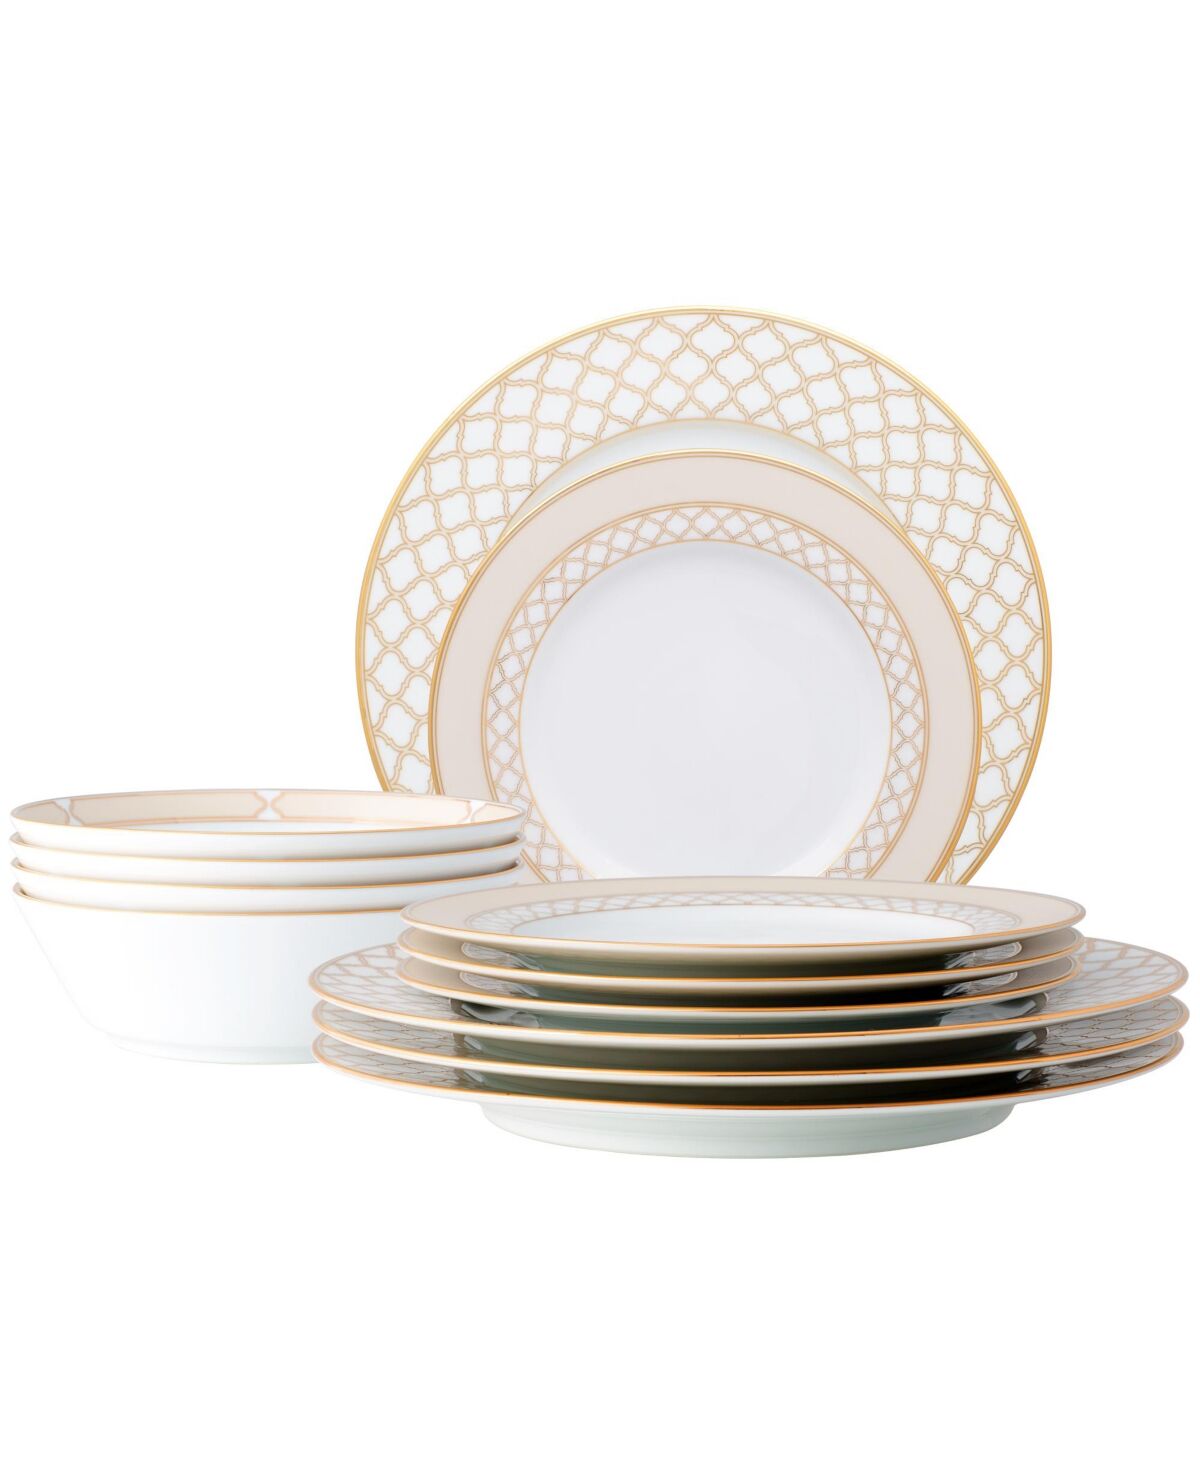 Noritake Eternal Palace Gold 12-Pc Dinnerware Set, Service for 4 - White And Gold